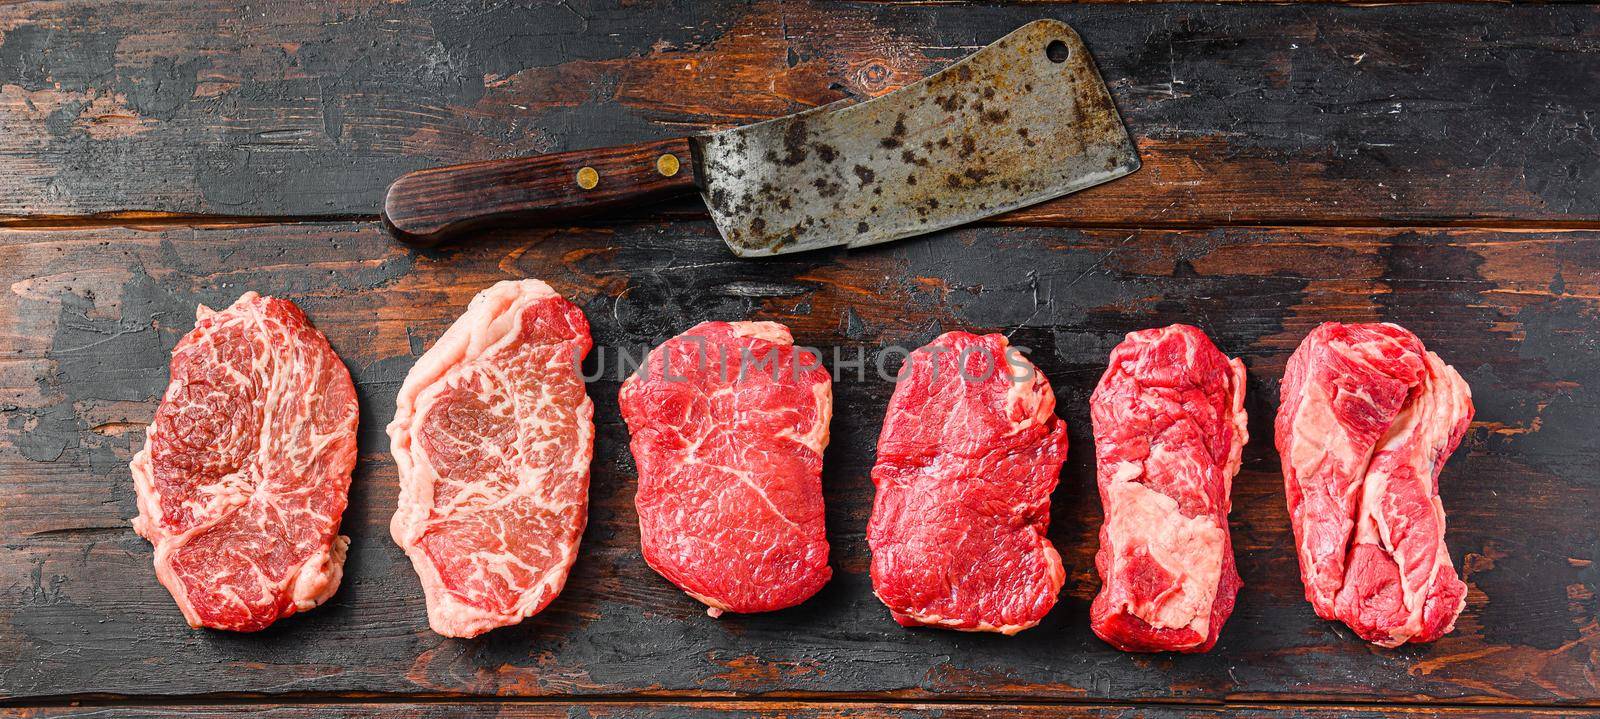 A set of different types of raw beef steaks:top blade, rump, chuck eye roll over old wooden background top view with butcher cleaver